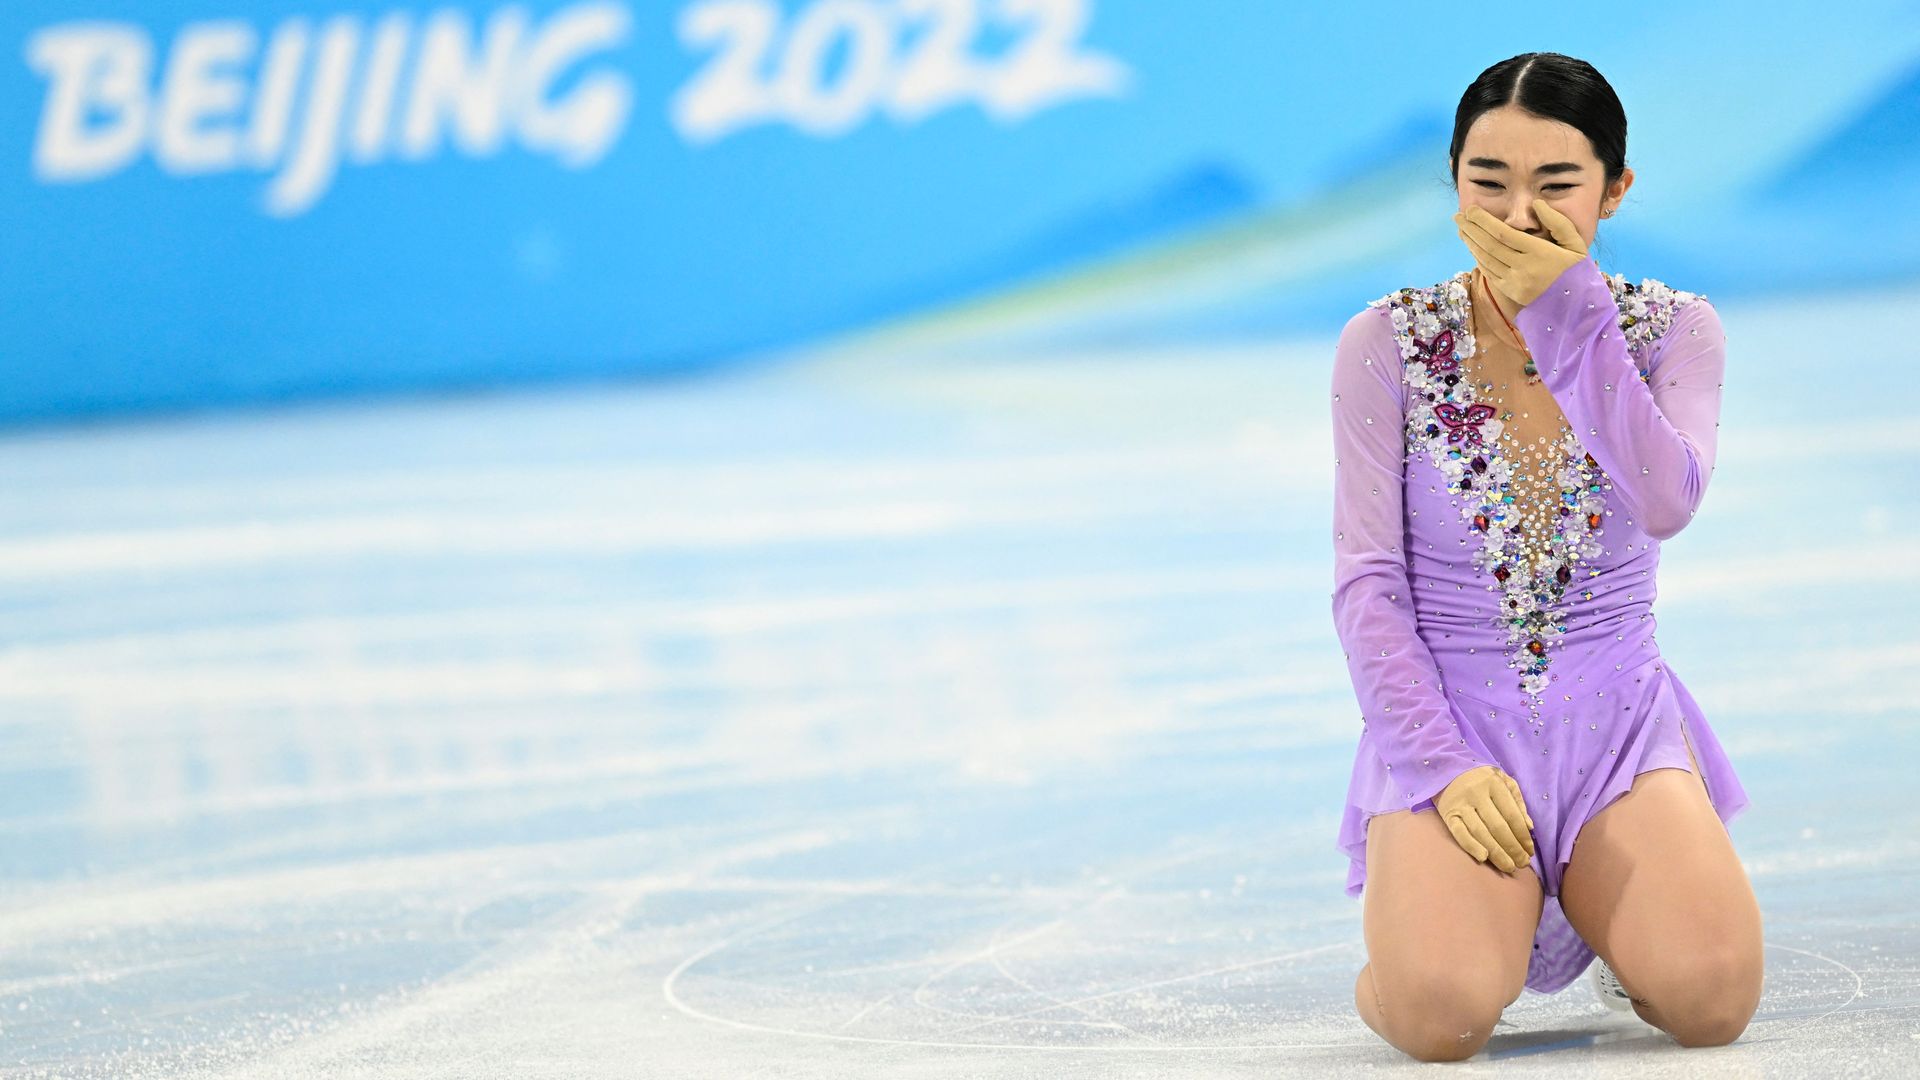 USA's Karen Chen reacts after competing in the women's single skating free skating of the figure skating team event during the Beijing 2022 Winter Olympic Games February 7.